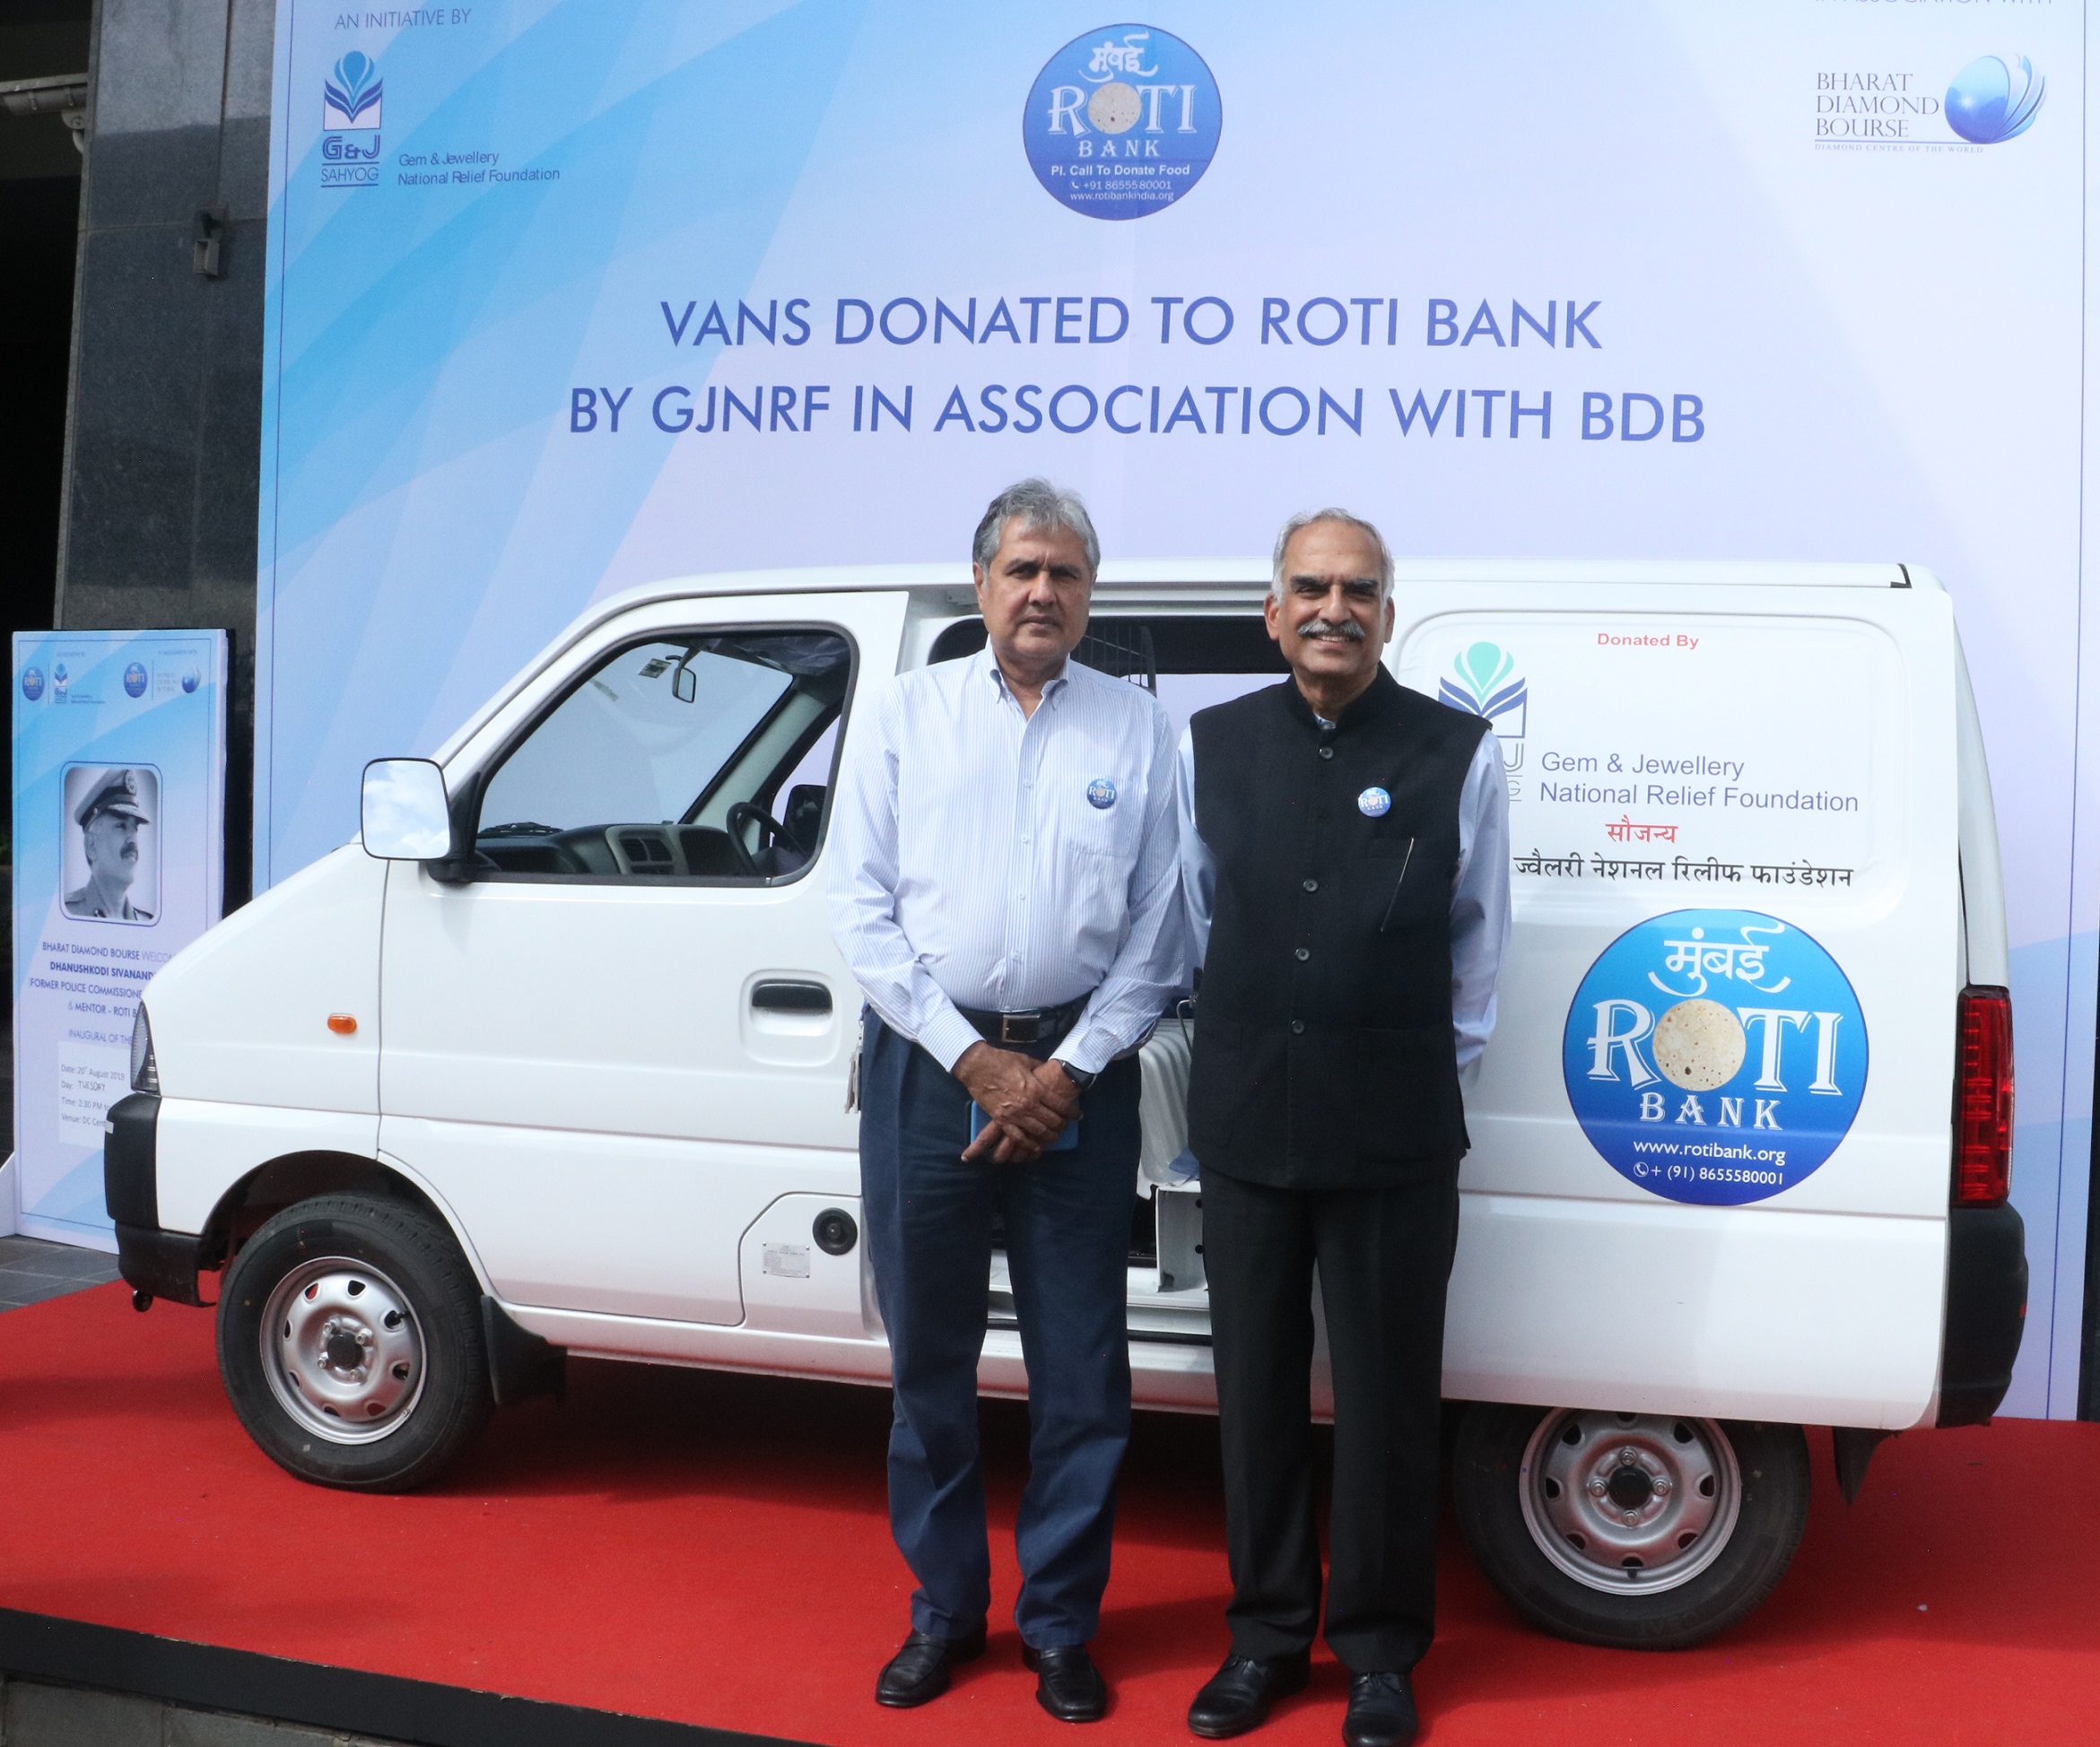 Shri D Sivanandhan receiving 2 vans donated to his Non-profit organisation Roti Bank at a function held today at Bharat Diamond Bourse at BKC in Mumbai.  The Gems and Jewellery National Relief Foundation along with Bharat Diamond Bourse donated these 2 vans to the NGO Roti Bank.-Photo By GPN